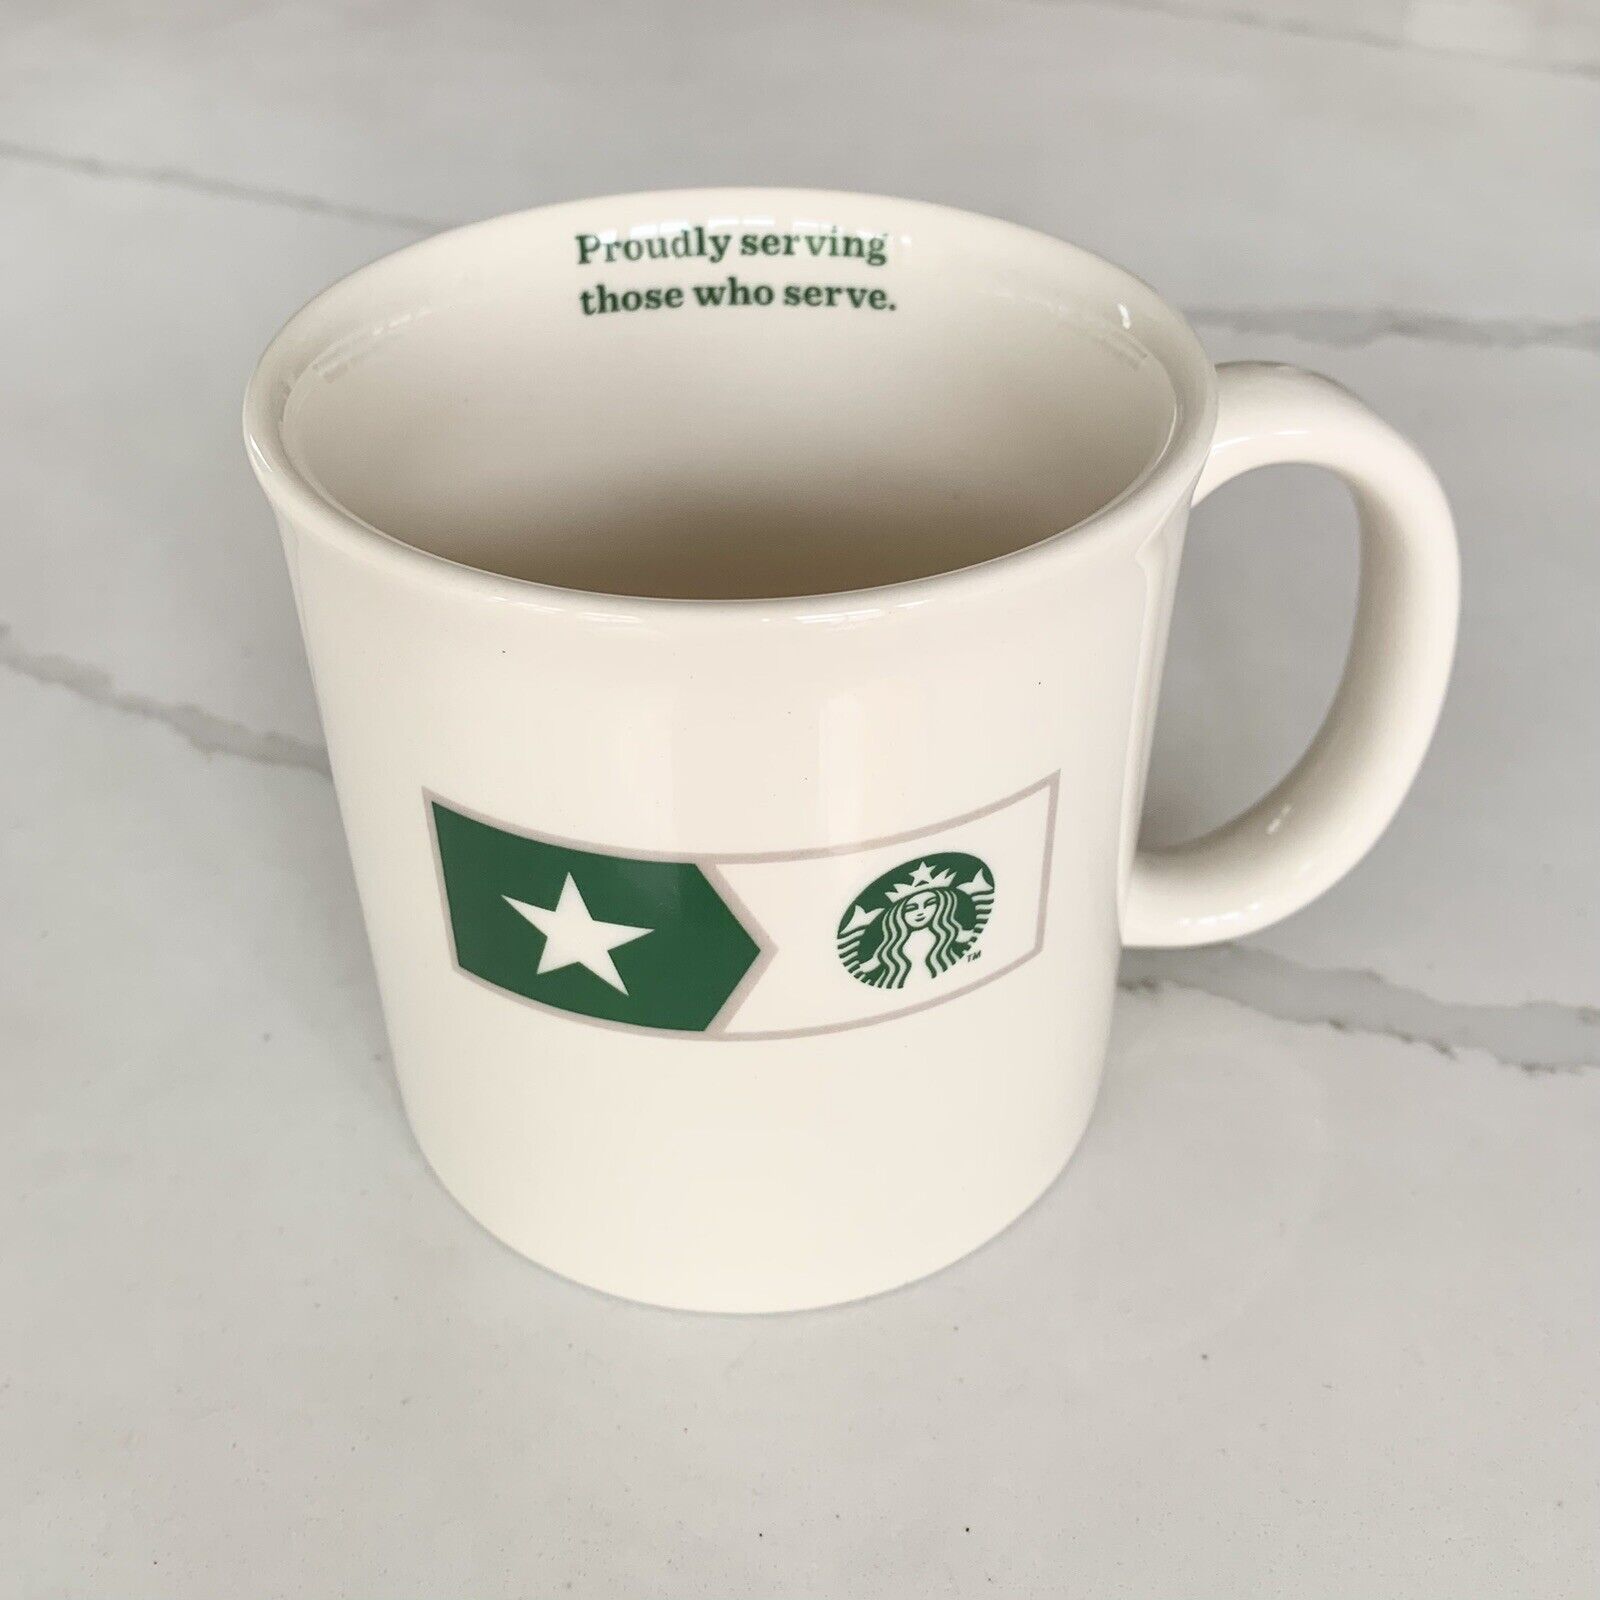 Starbucks 2013 Military Proudly Serving Those Who Serve 14 oz Mug coffee cup